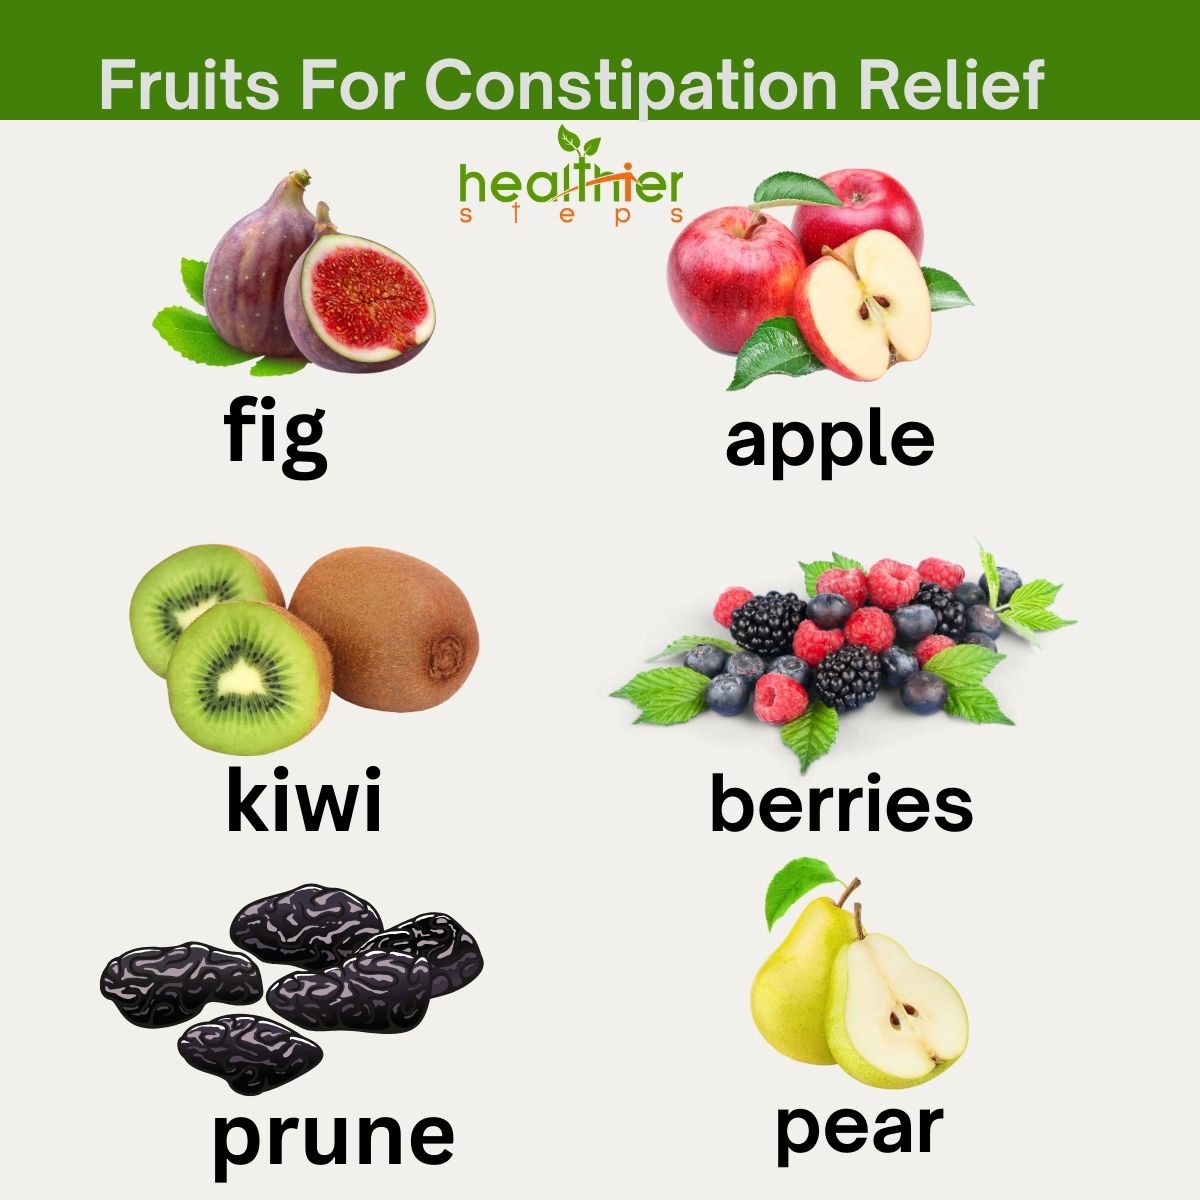 Fruits For Constipation Relief